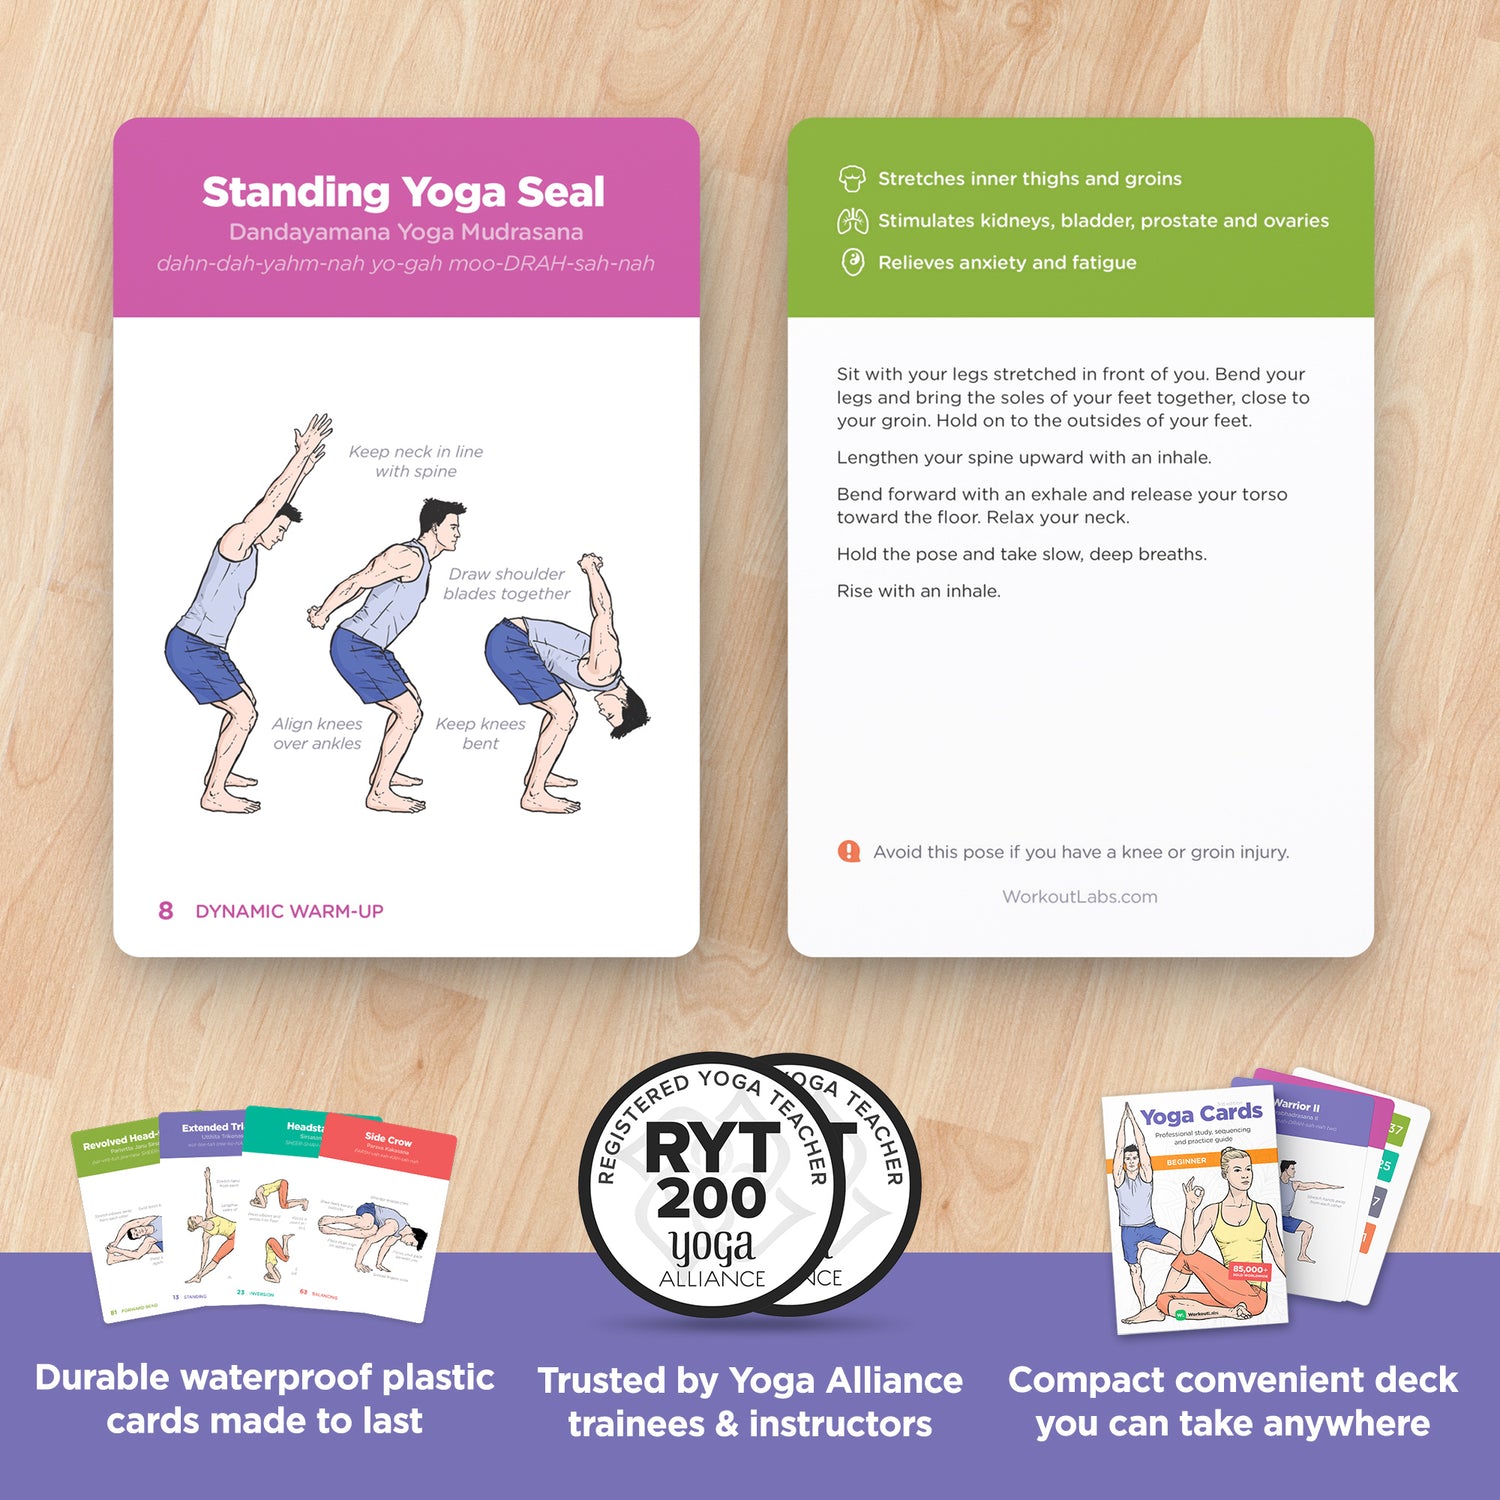 WorkoutLabs Yoga Cards – Beginner: Visual Study, Class Sequencing & Practice Guide with Essential Poses, Breathing Exercises & Meditation · Plastic Flash Cards Deck with Sanskrit